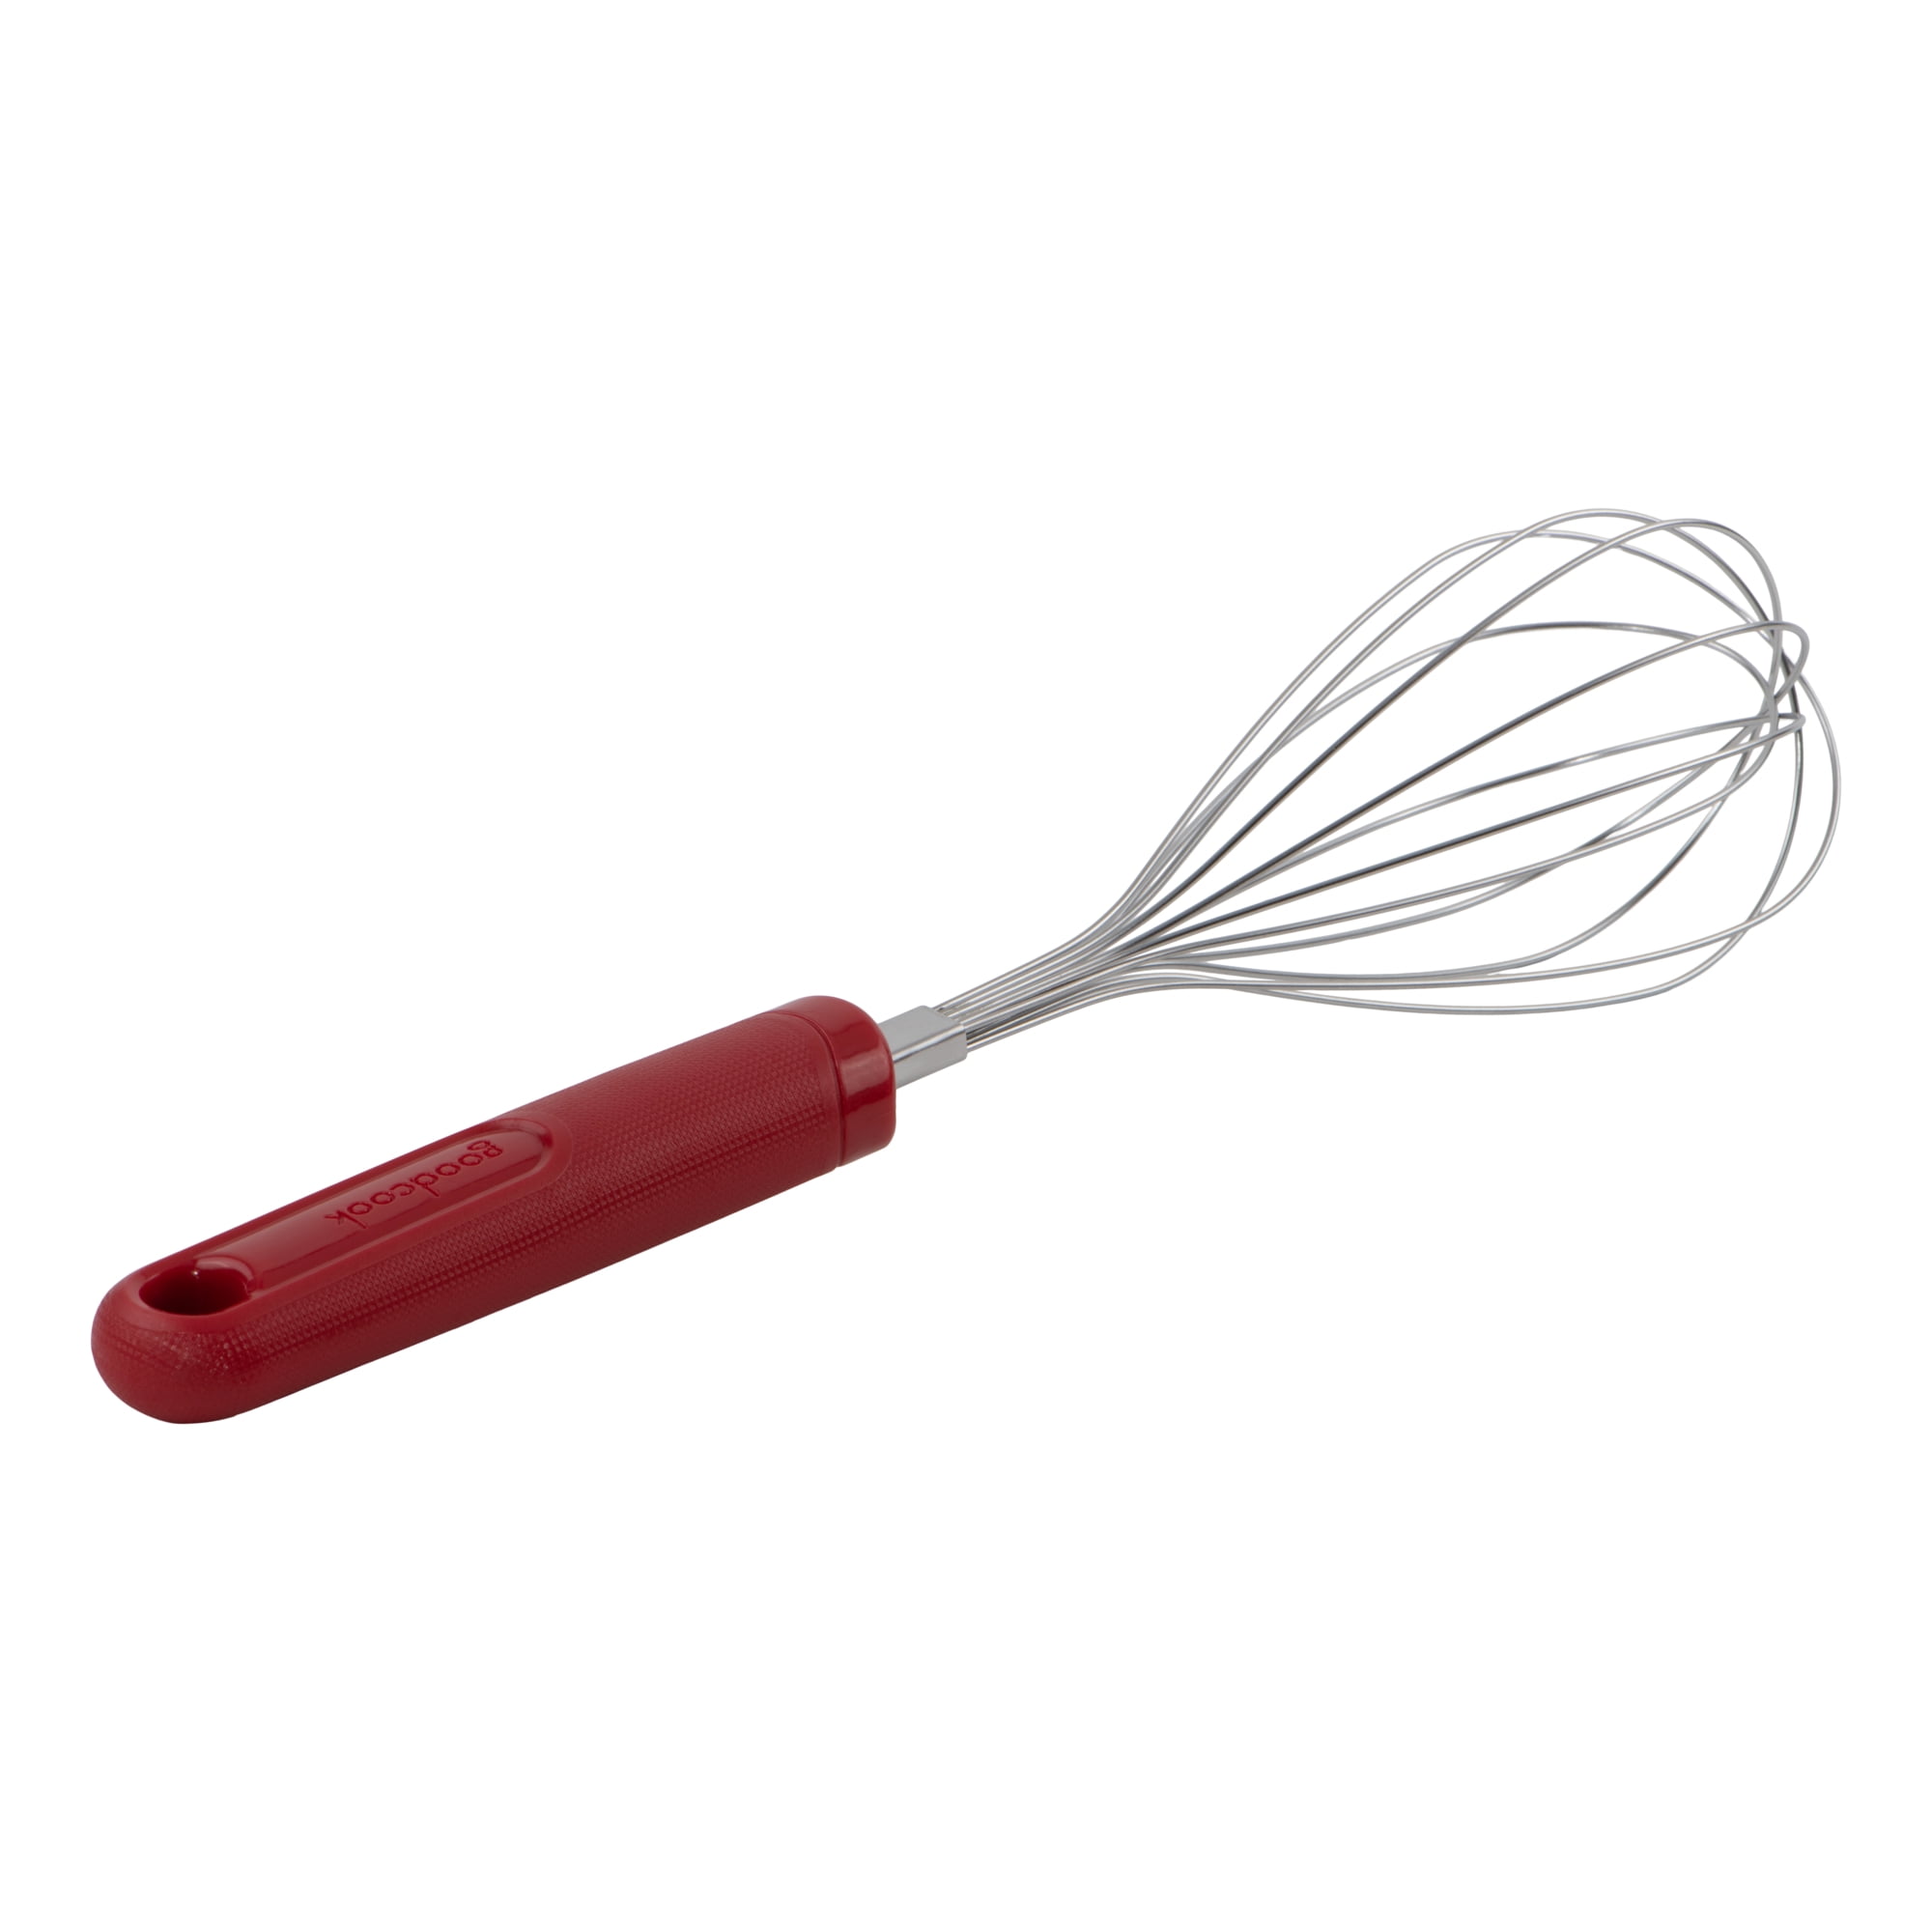 GoodCook PROfreshionals 10.5" Stainless Steel Balloon Whisk, Red